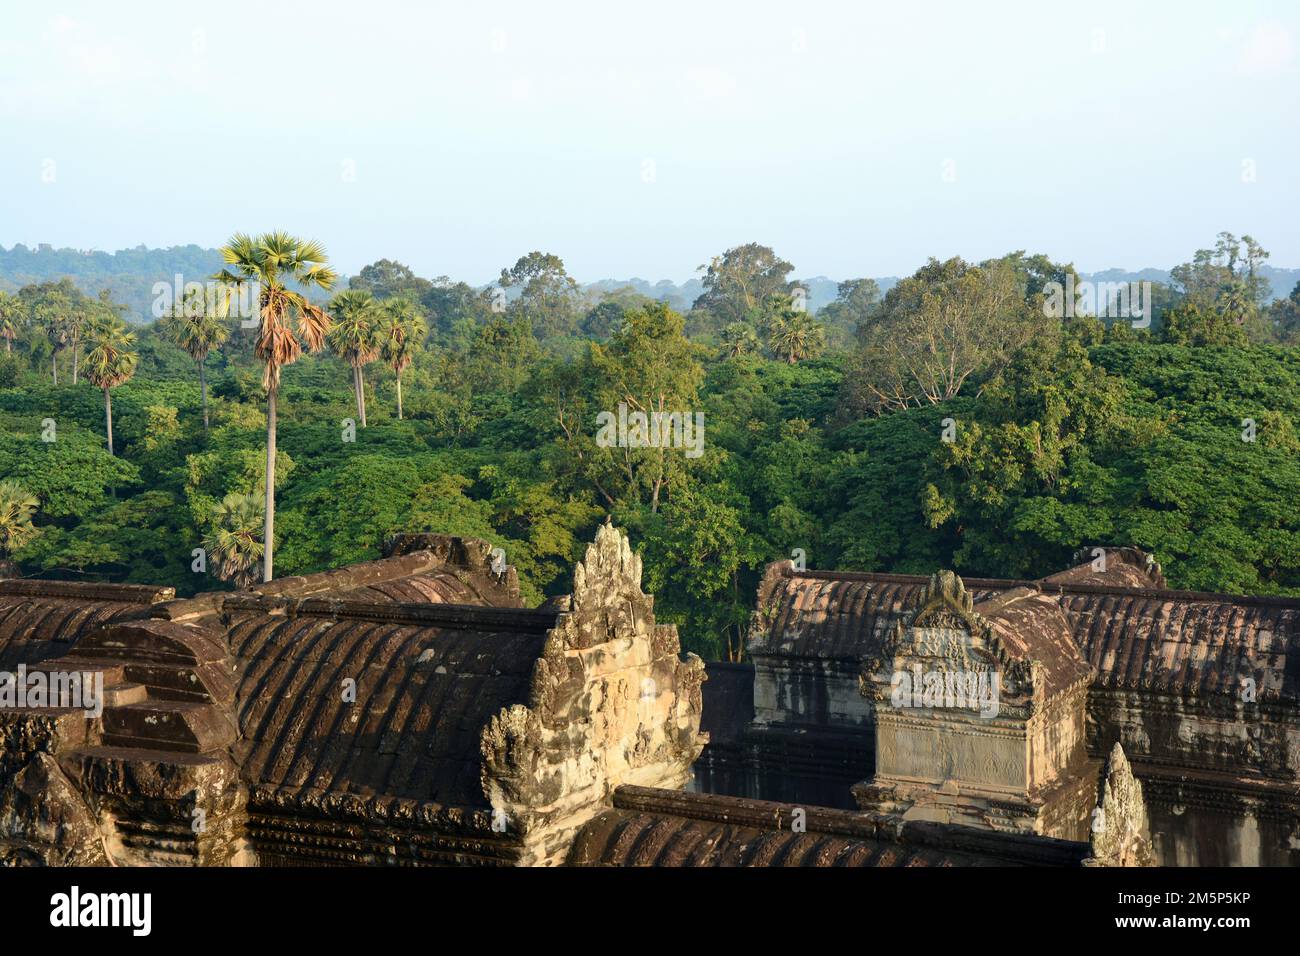 Angkor Wat roofs from the top of the temple with the cambodian rainforest in the background, Cambodia Stock Photo